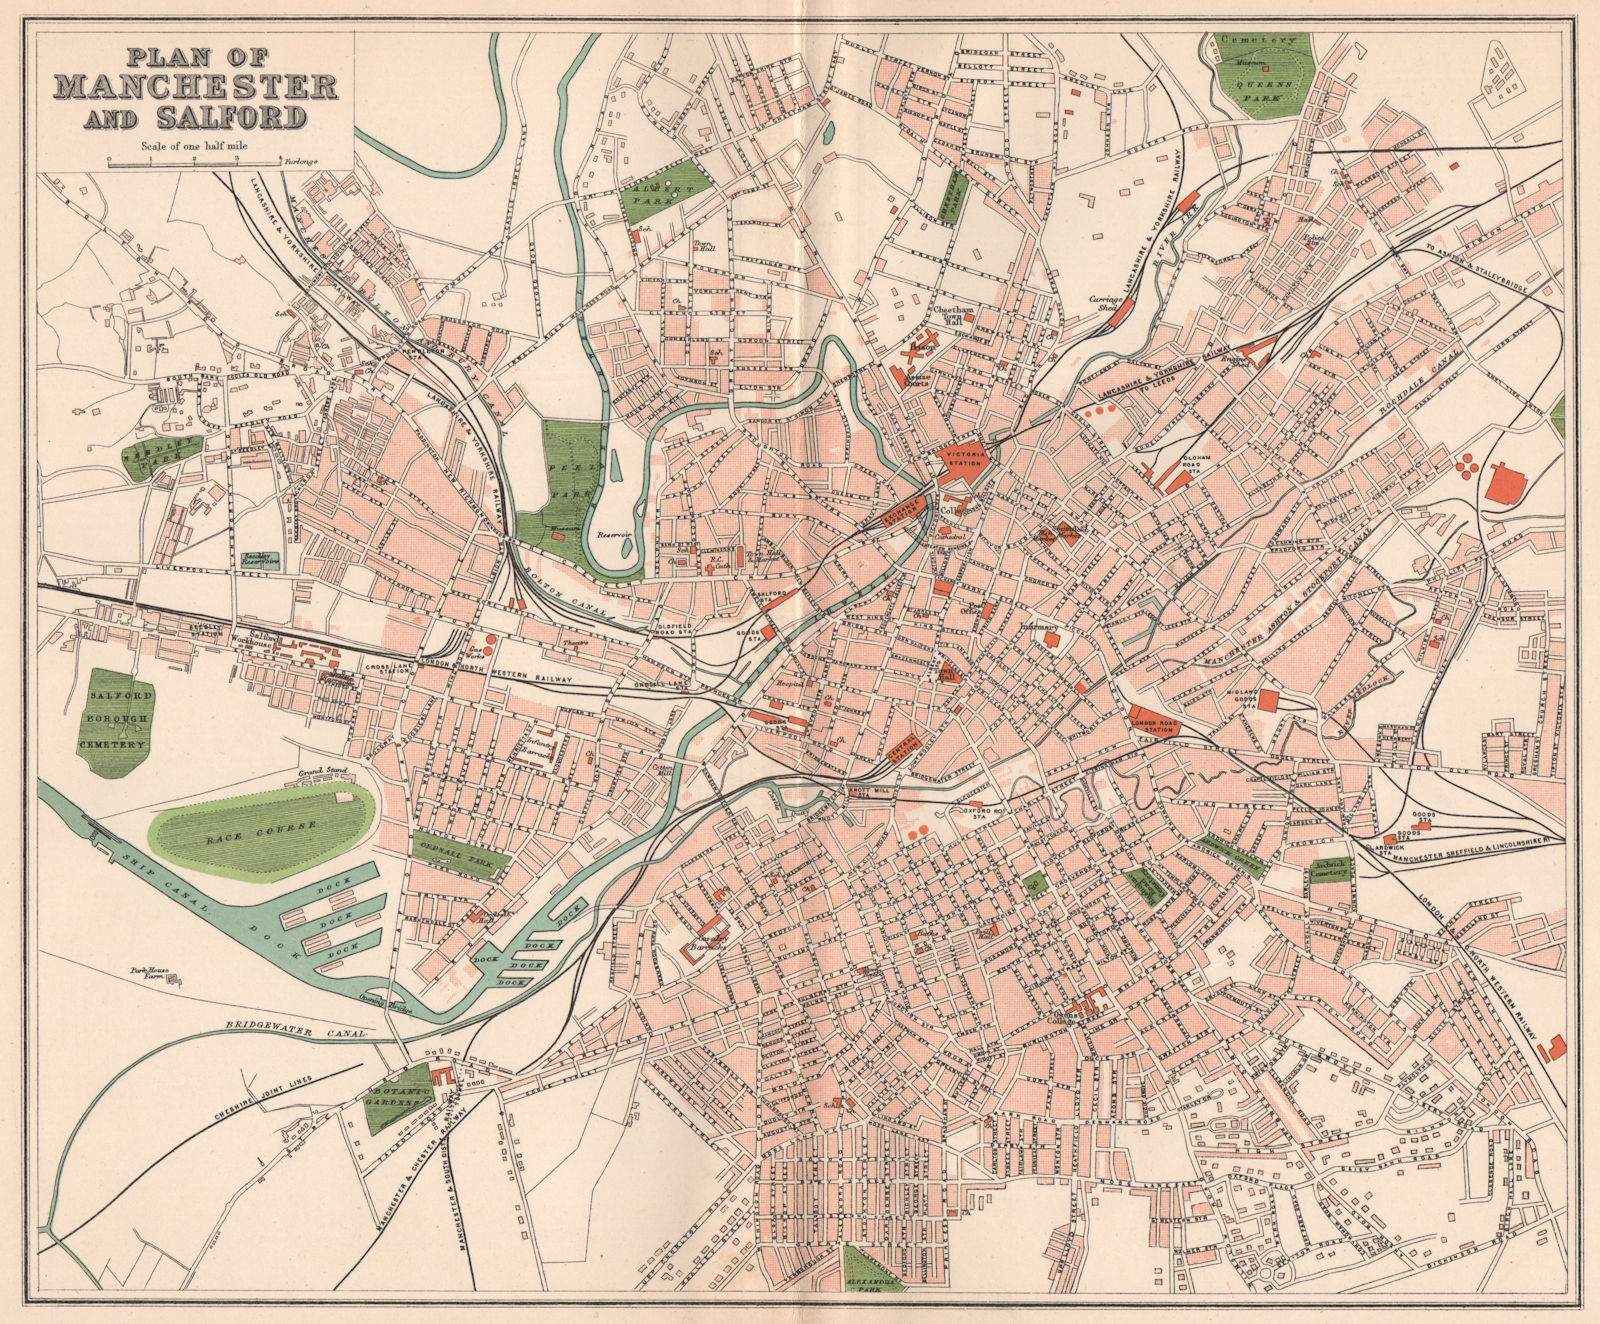 Associate Product MANCHESTER AND SALFORD. Antique town/city map plan. Lancashire 1893 old